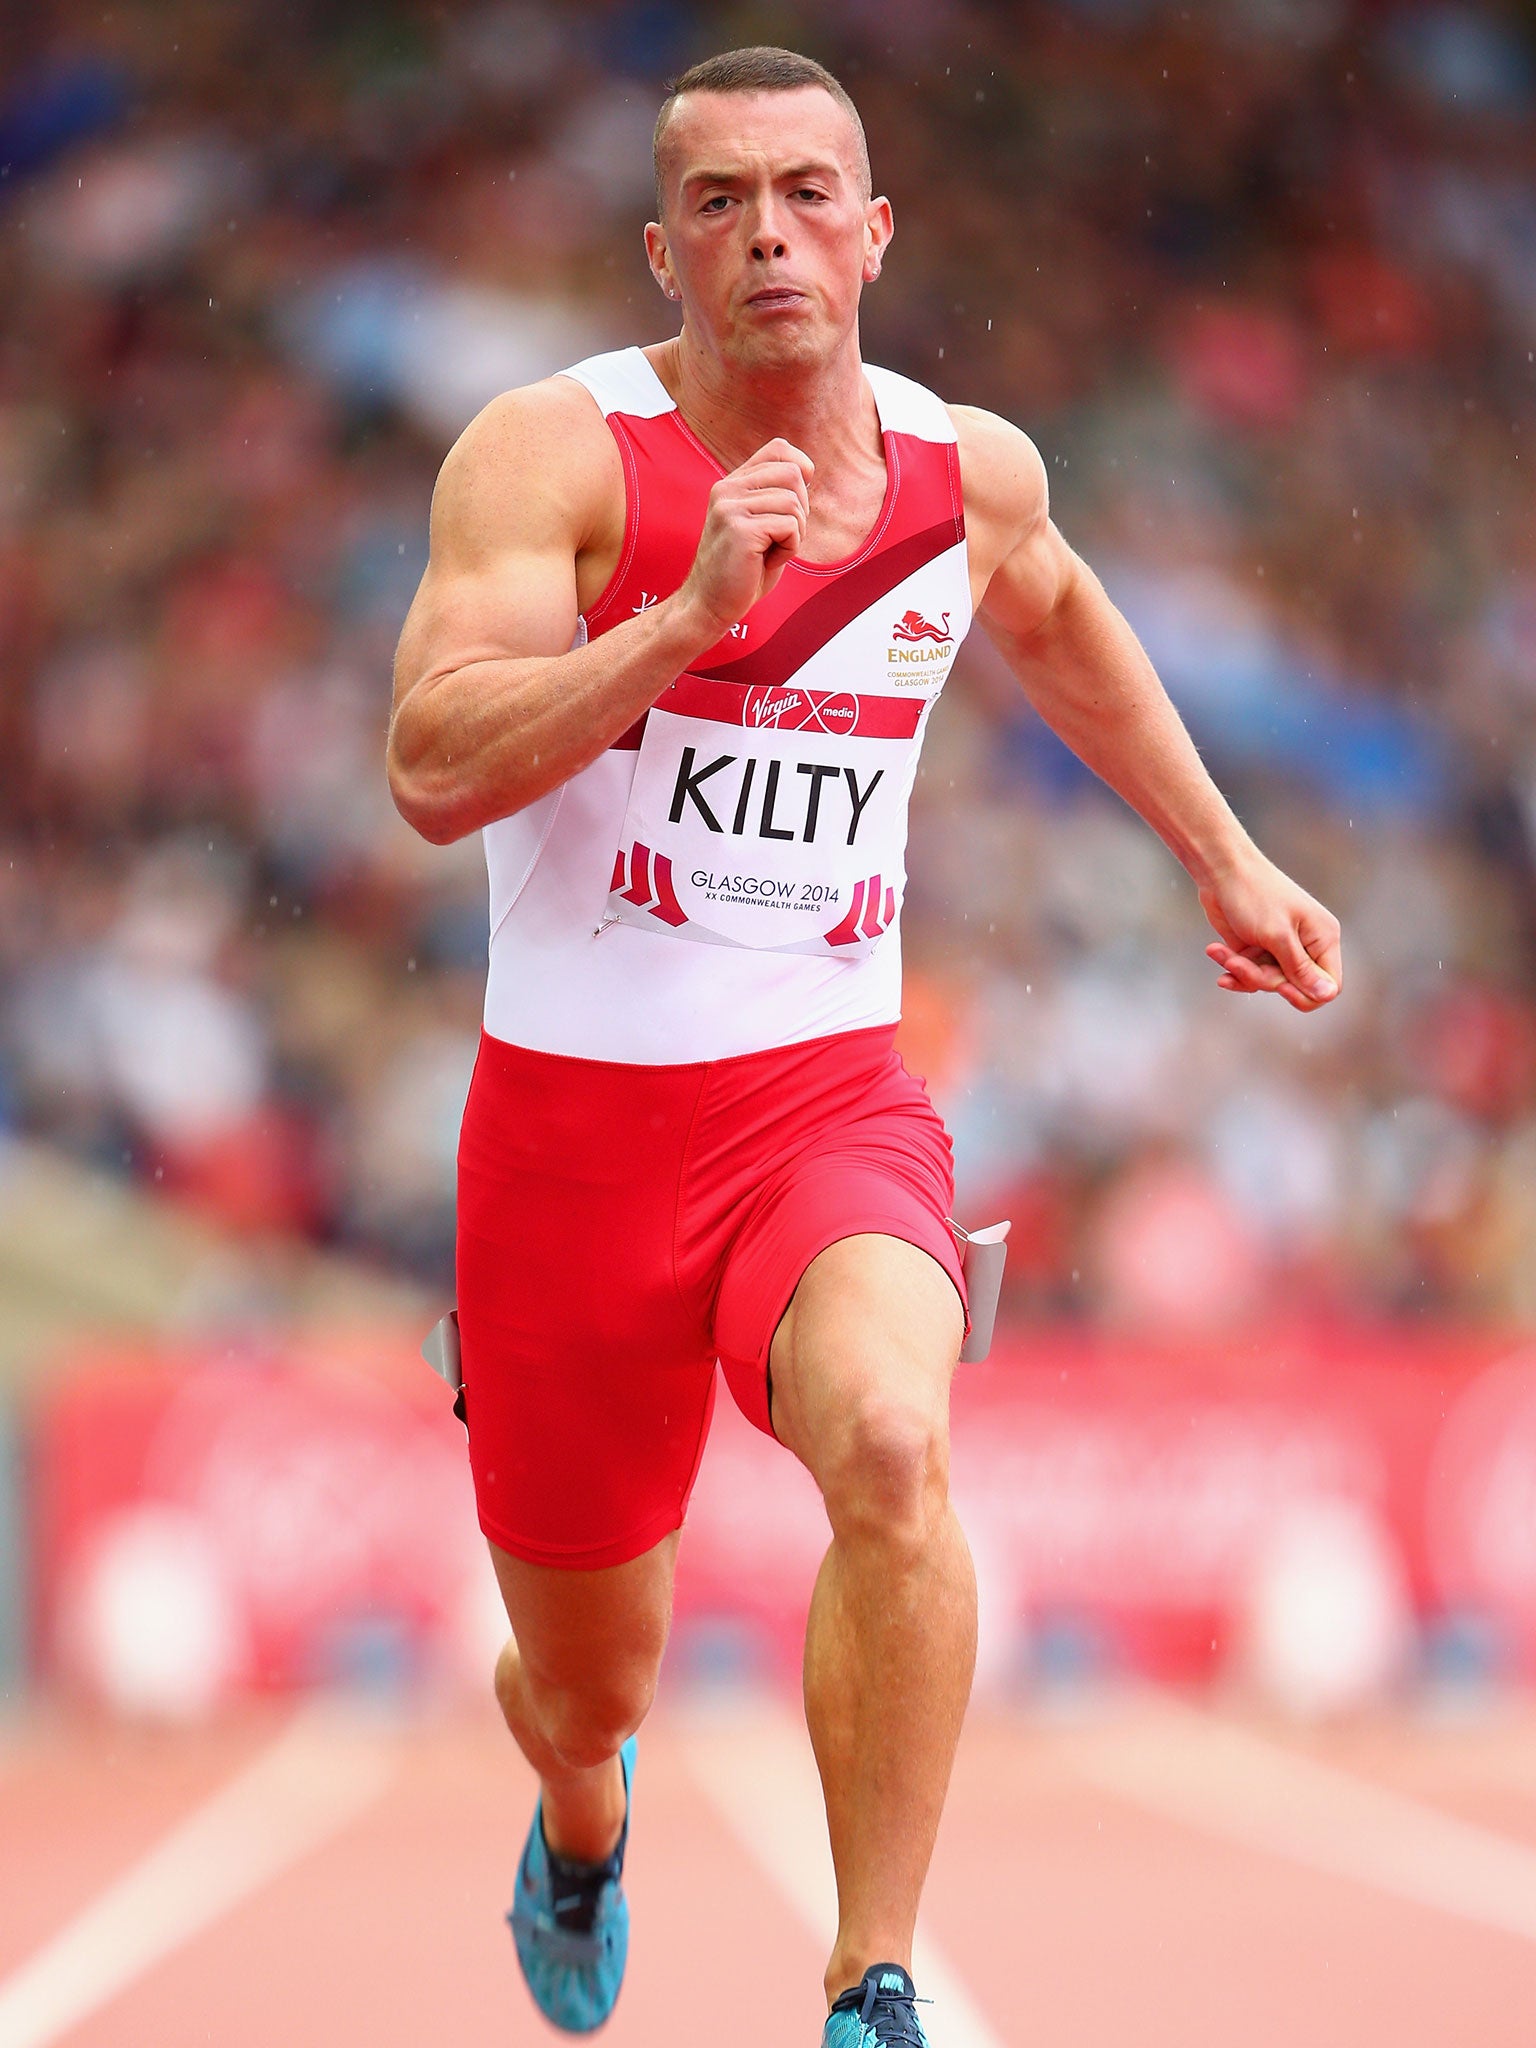 Richard Kilty has dedicated his performances in Glasgow to a friend who drowned last week